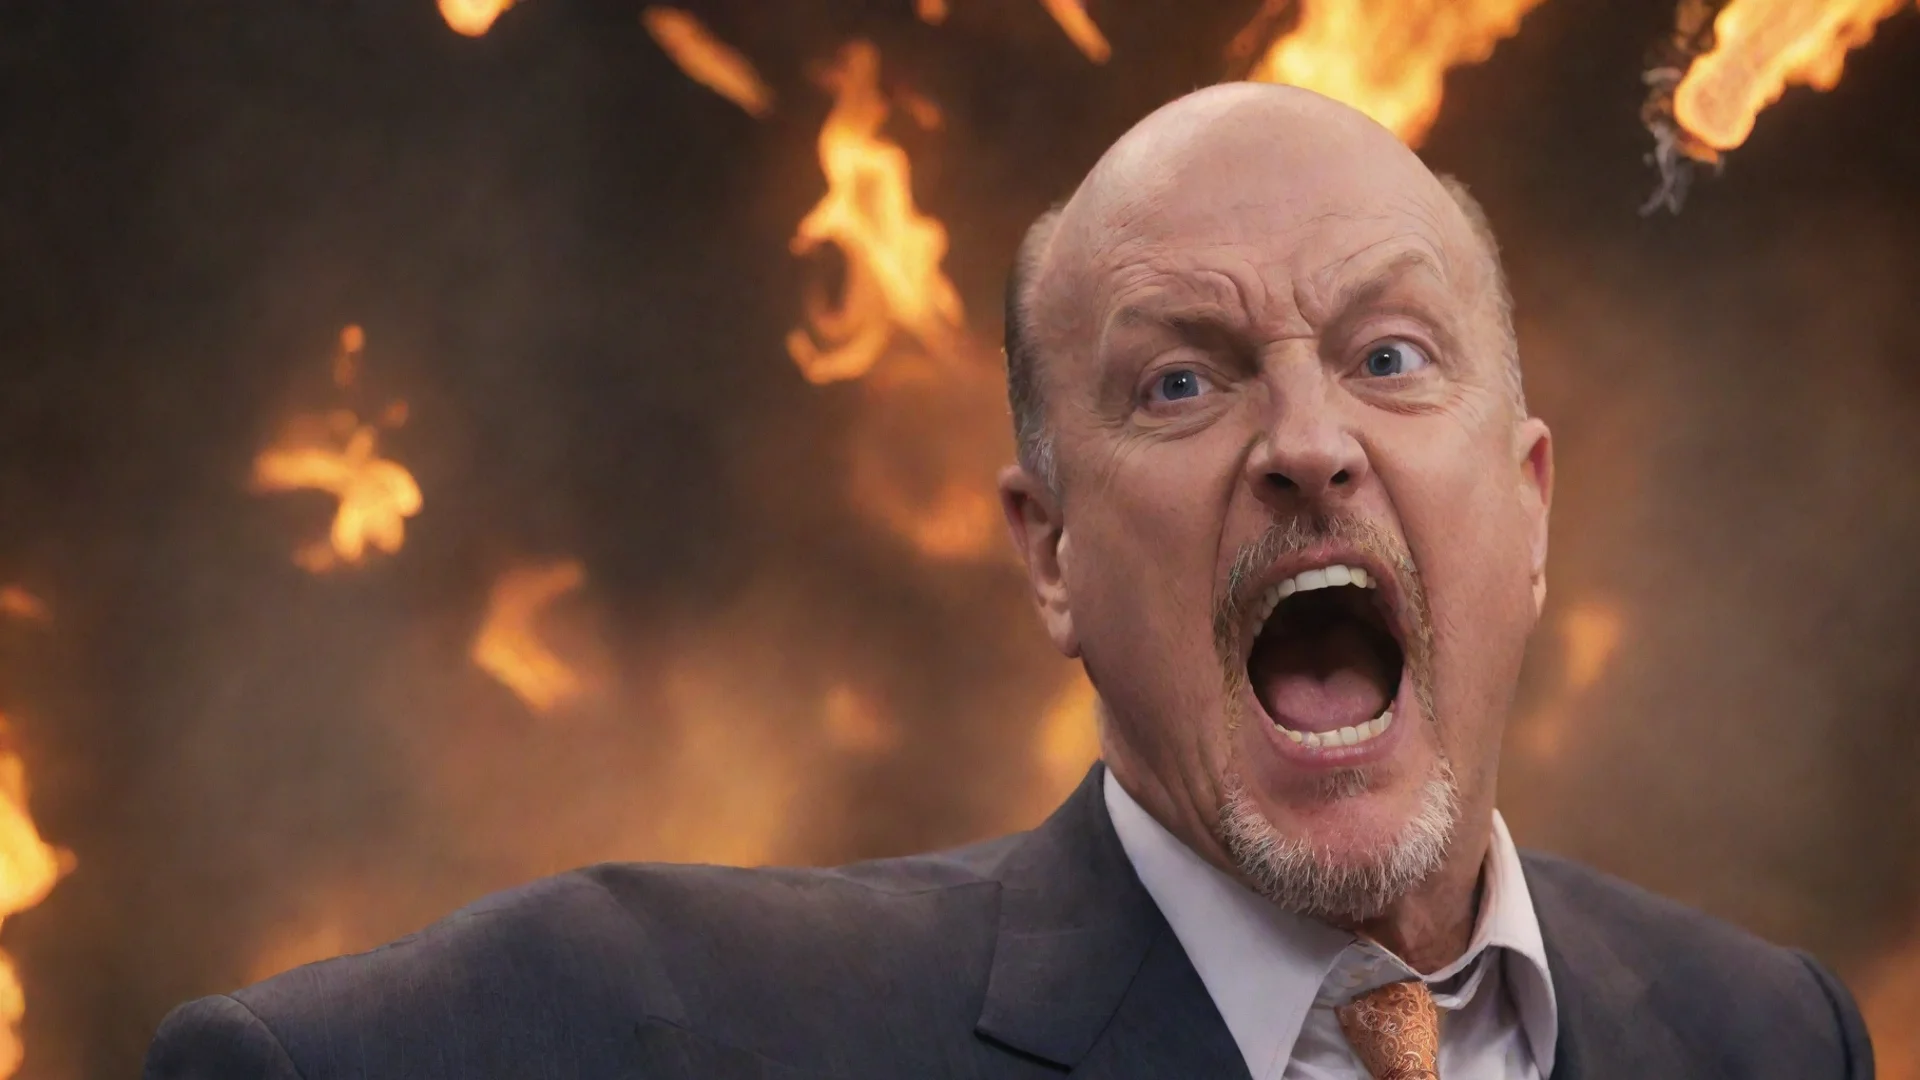 amazing jim cramer screaming at a blazing bitcoin awesome portrait 2 wide